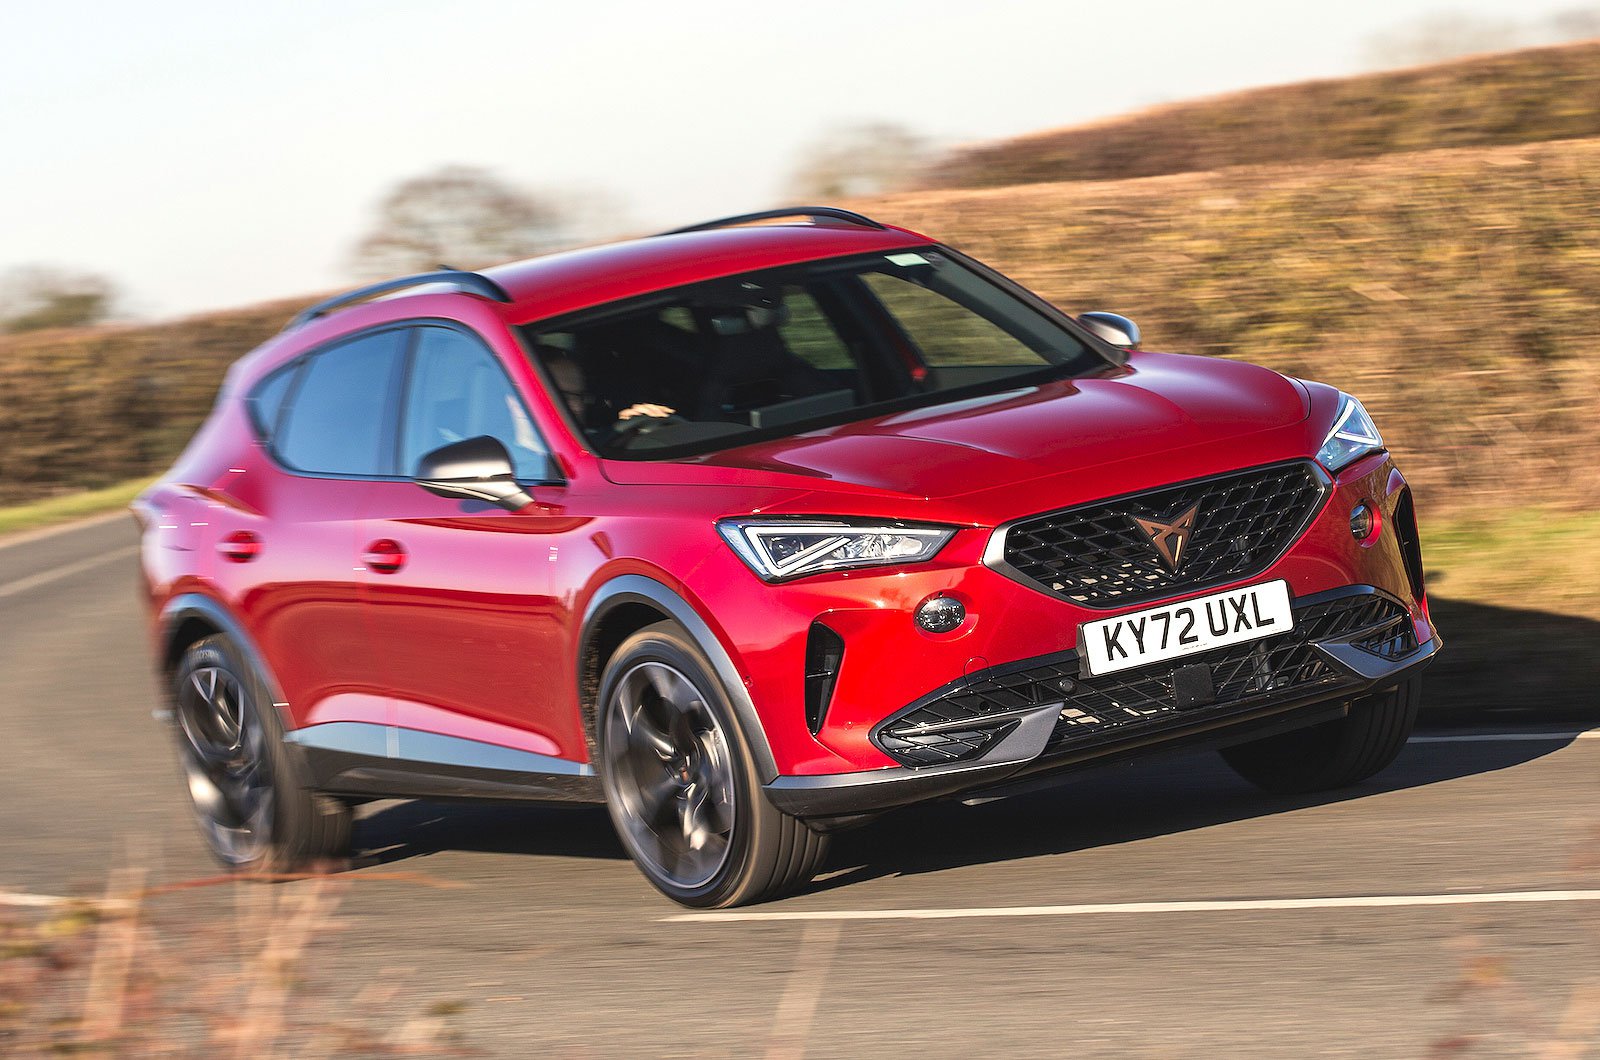 <p>Even though you can get the Formentor with a brilliant 306bhp engine, we think the 148bhp 1.5-litre petrol makes more sense for every day use. It offers decent performance, while also being good value when combined with the entry-level V1 trim.</p>  <p><strong>What Car? deal: </strong>Save £1542 on a 1.5 TSI 150 V1, or up to £2280 on the Formentor range<strong> | Target Price </strong>£29,758<strong> | Target PCP </strong>£341 per month</p>